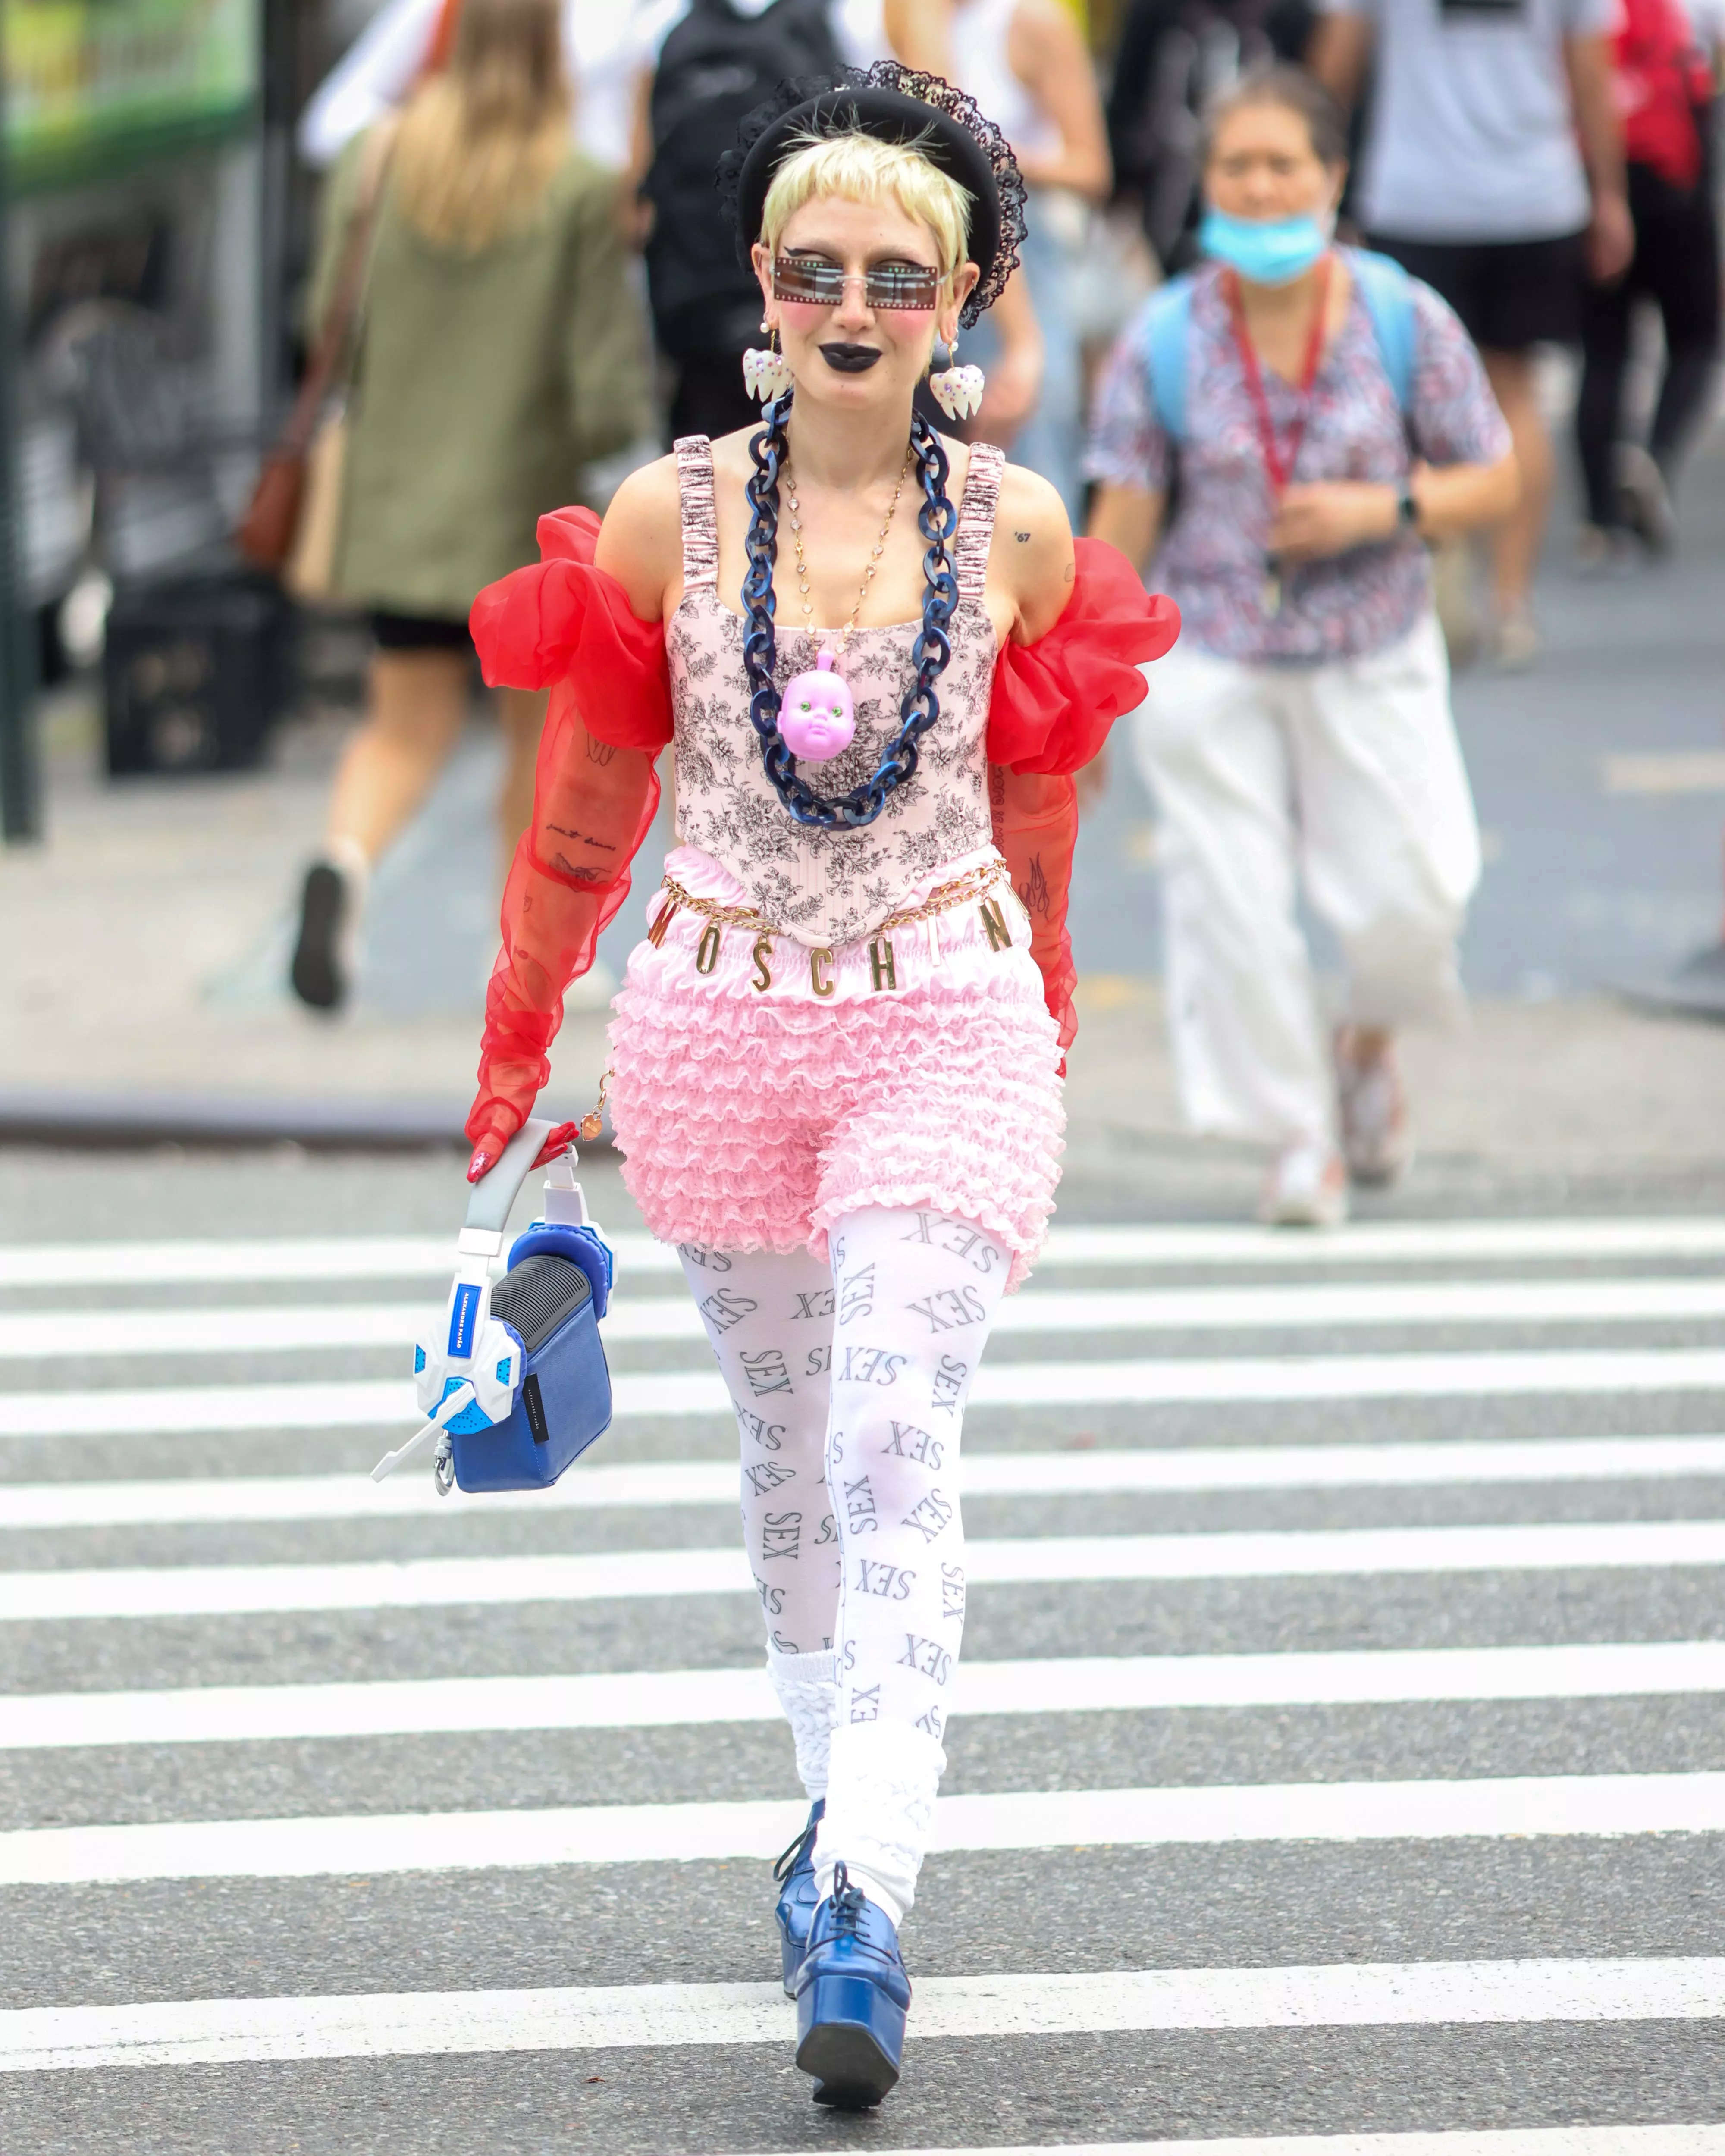 Stylist Sara Camposarcone walks down the street in a pink and red outfit with blue shoes